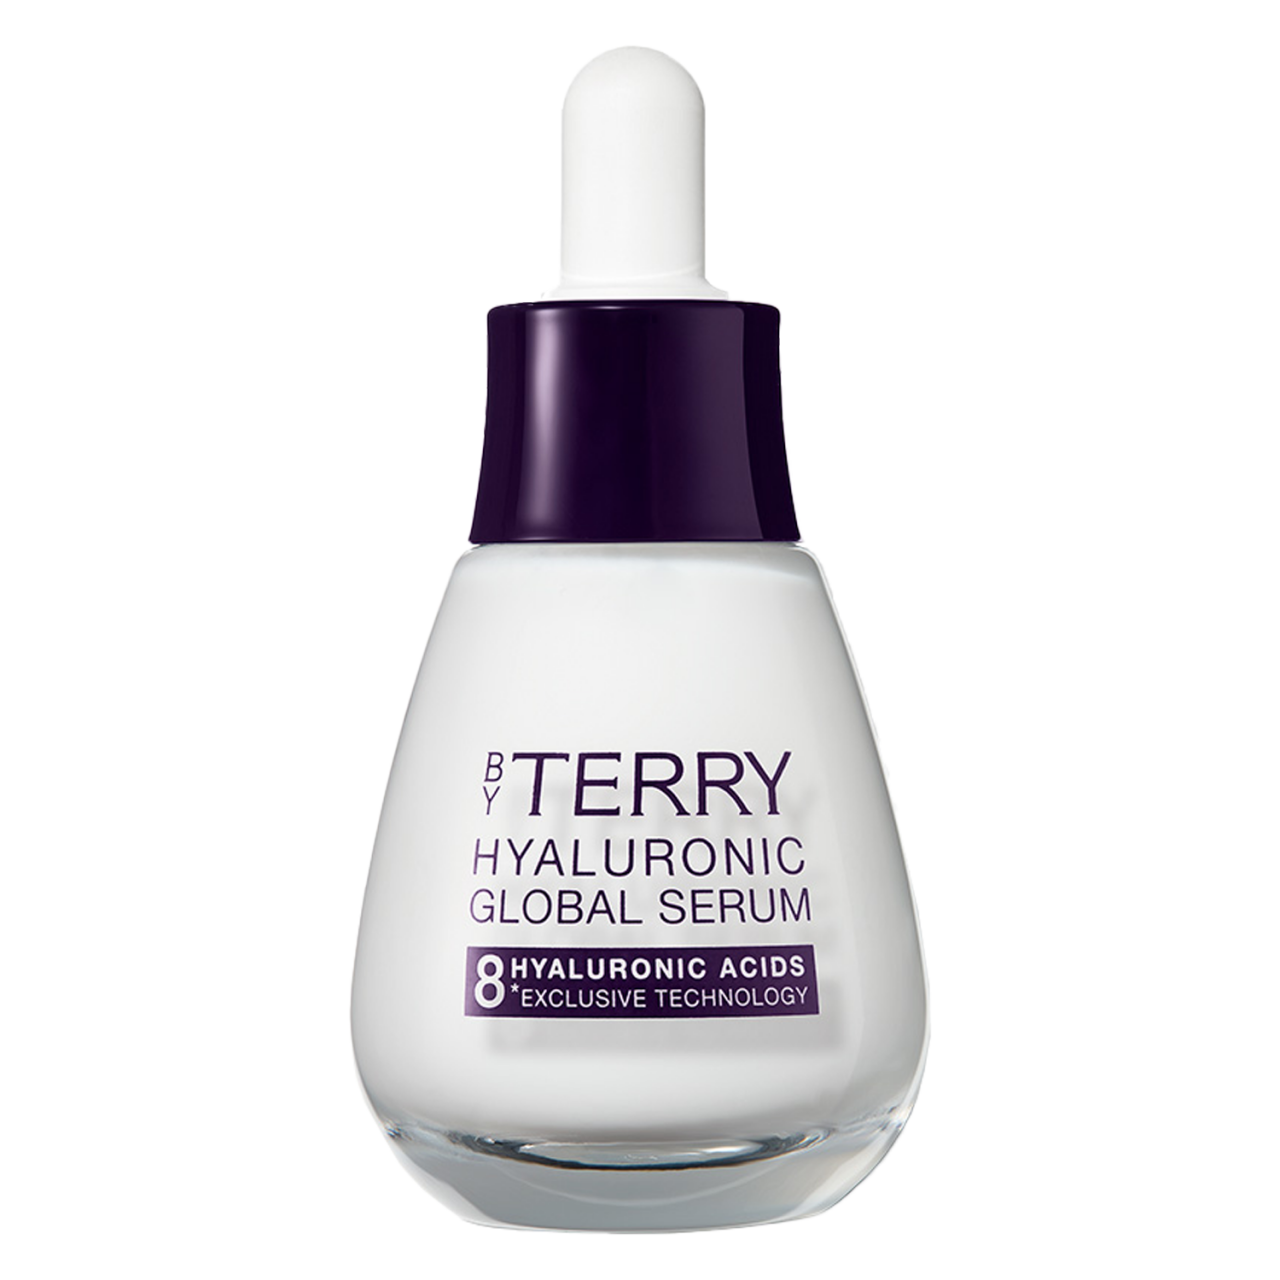 By Terry Care - Hyaluronic Global Serum von BY TERRY